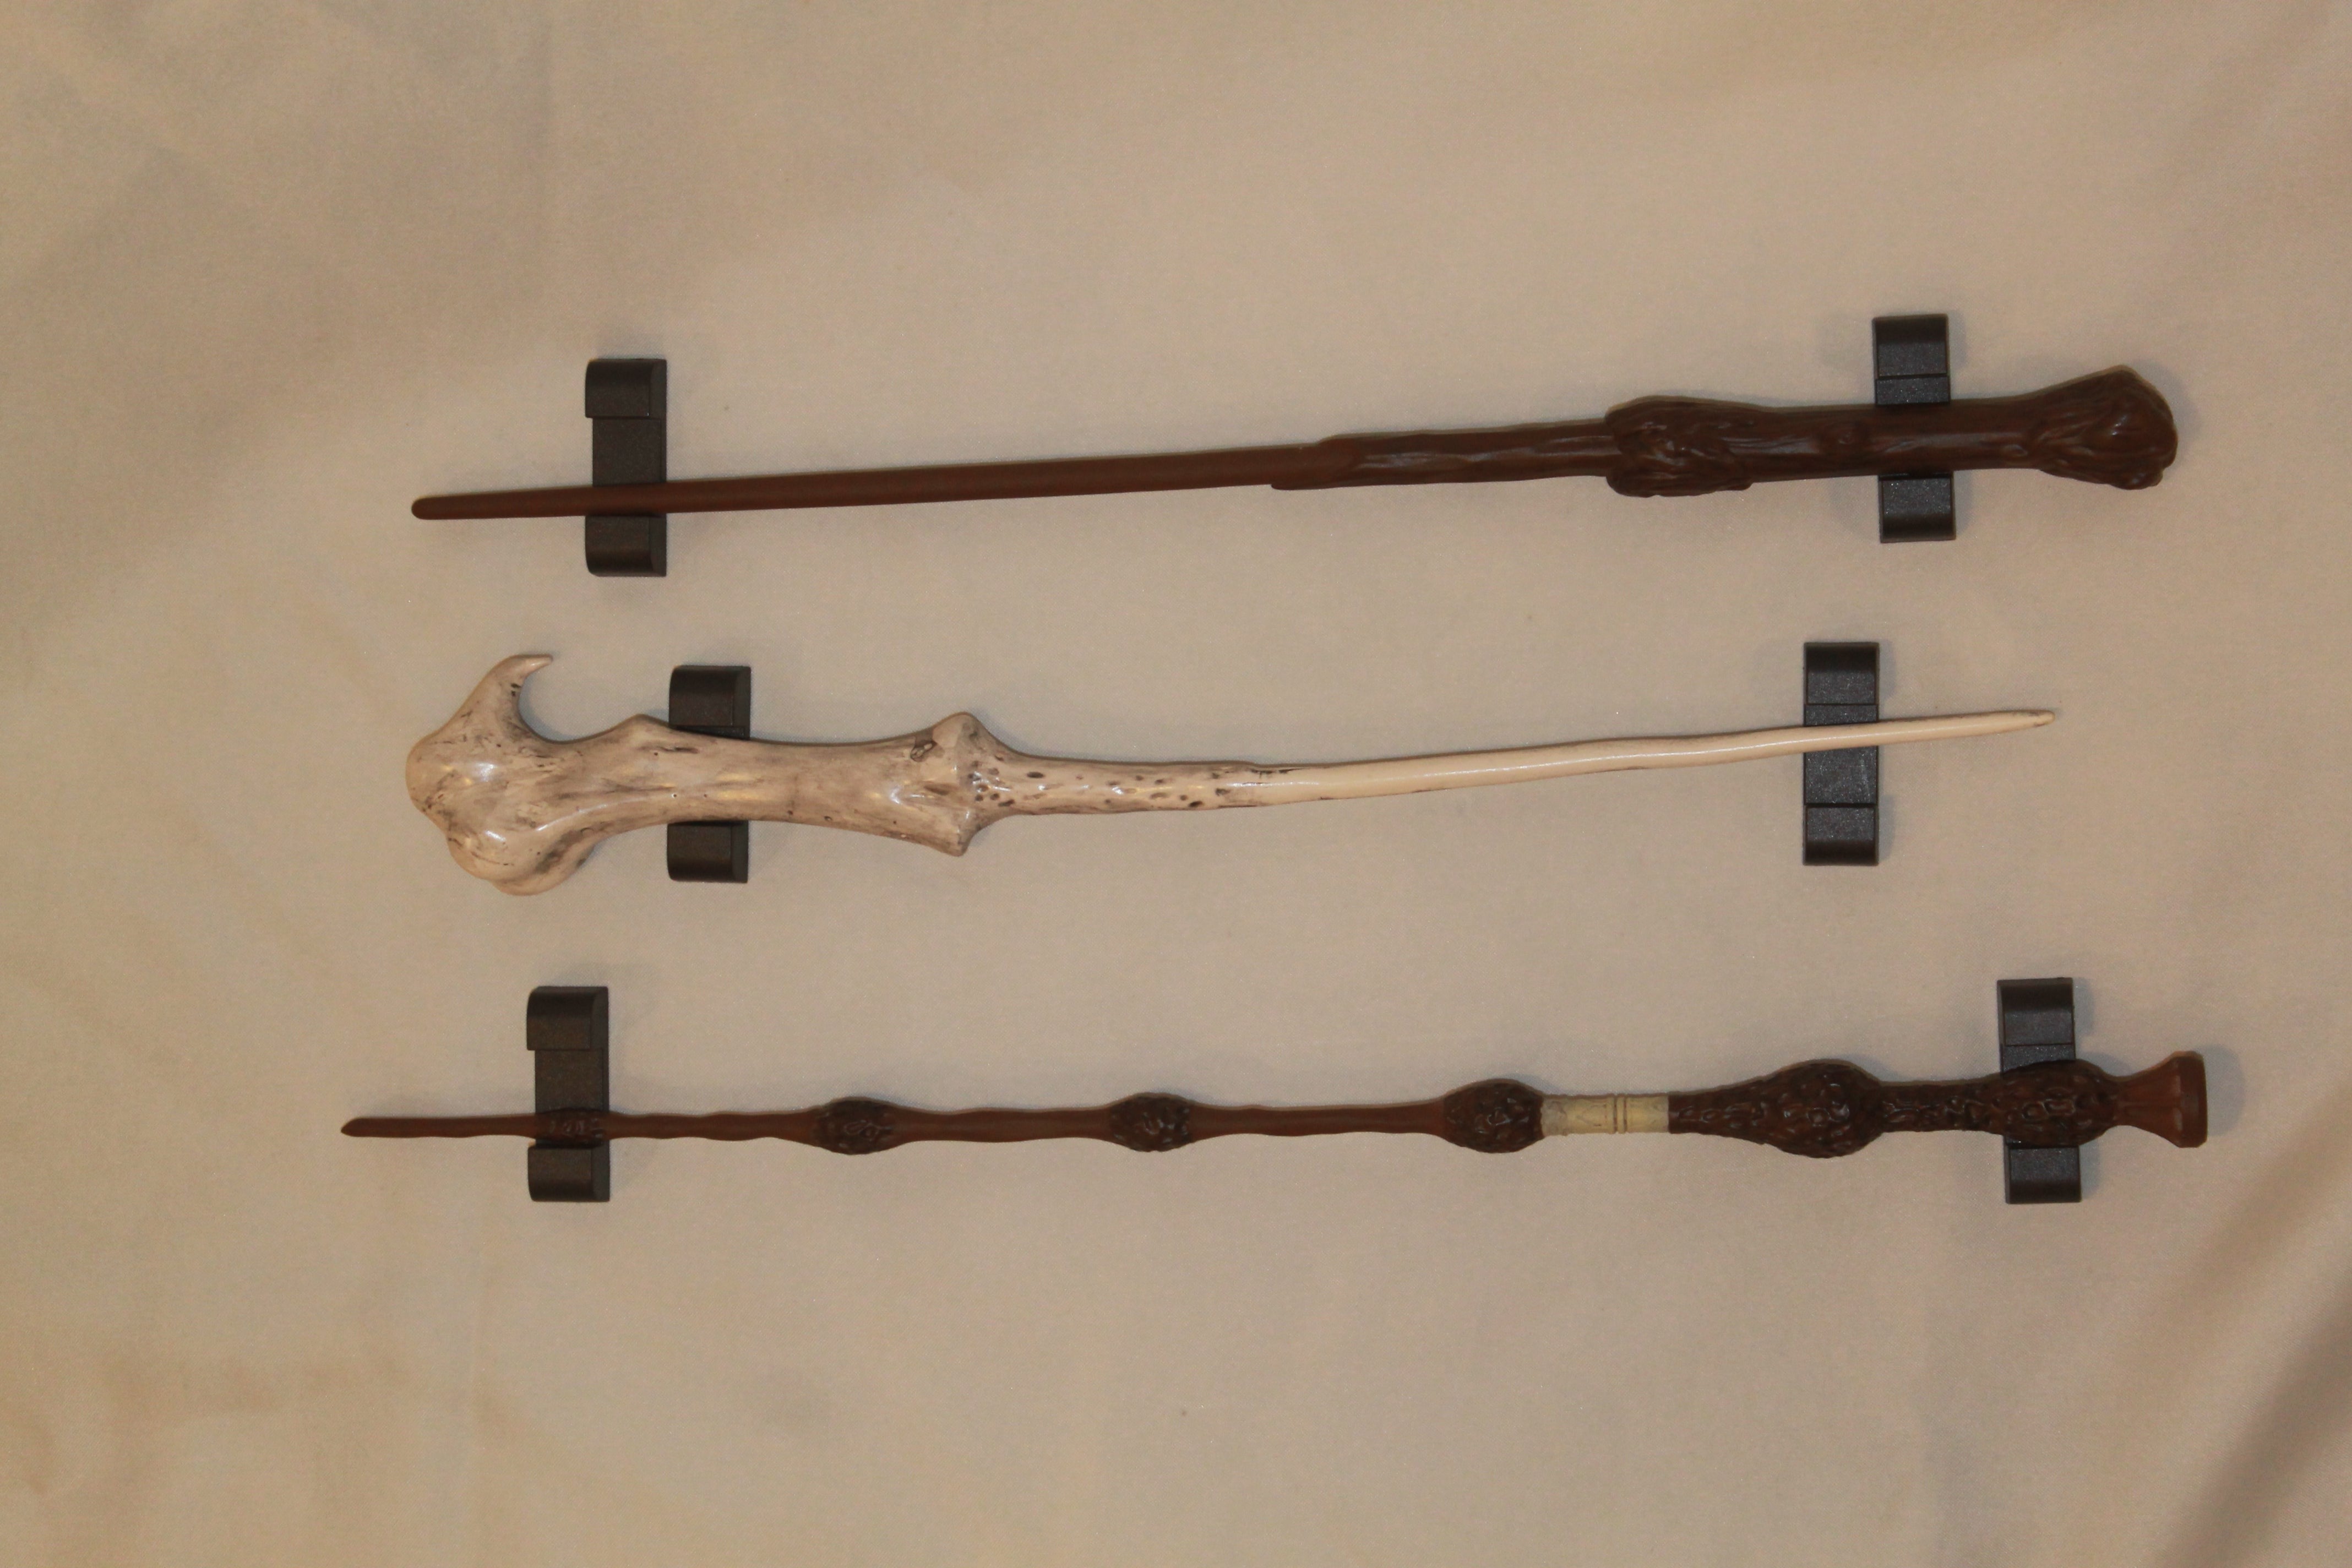 Screen Accurate Harry Potter Wands Including: Elder Wand, Voldermort's Wand, and Harry Potter Wand